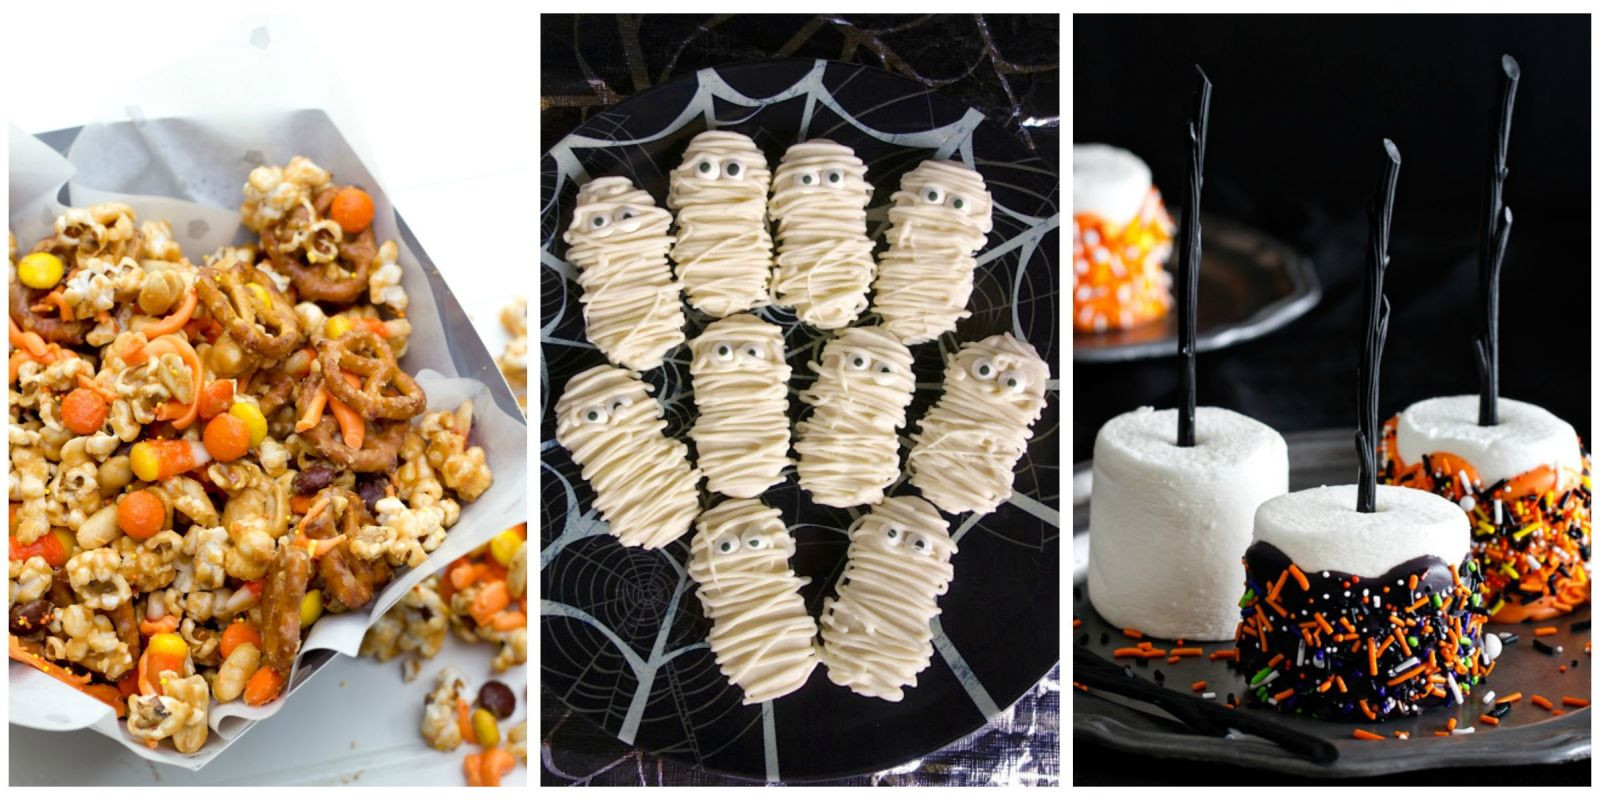 Simple Halloween Party Ideas
 22 Easy Halloween Party Food Ideas Cute Recipes for